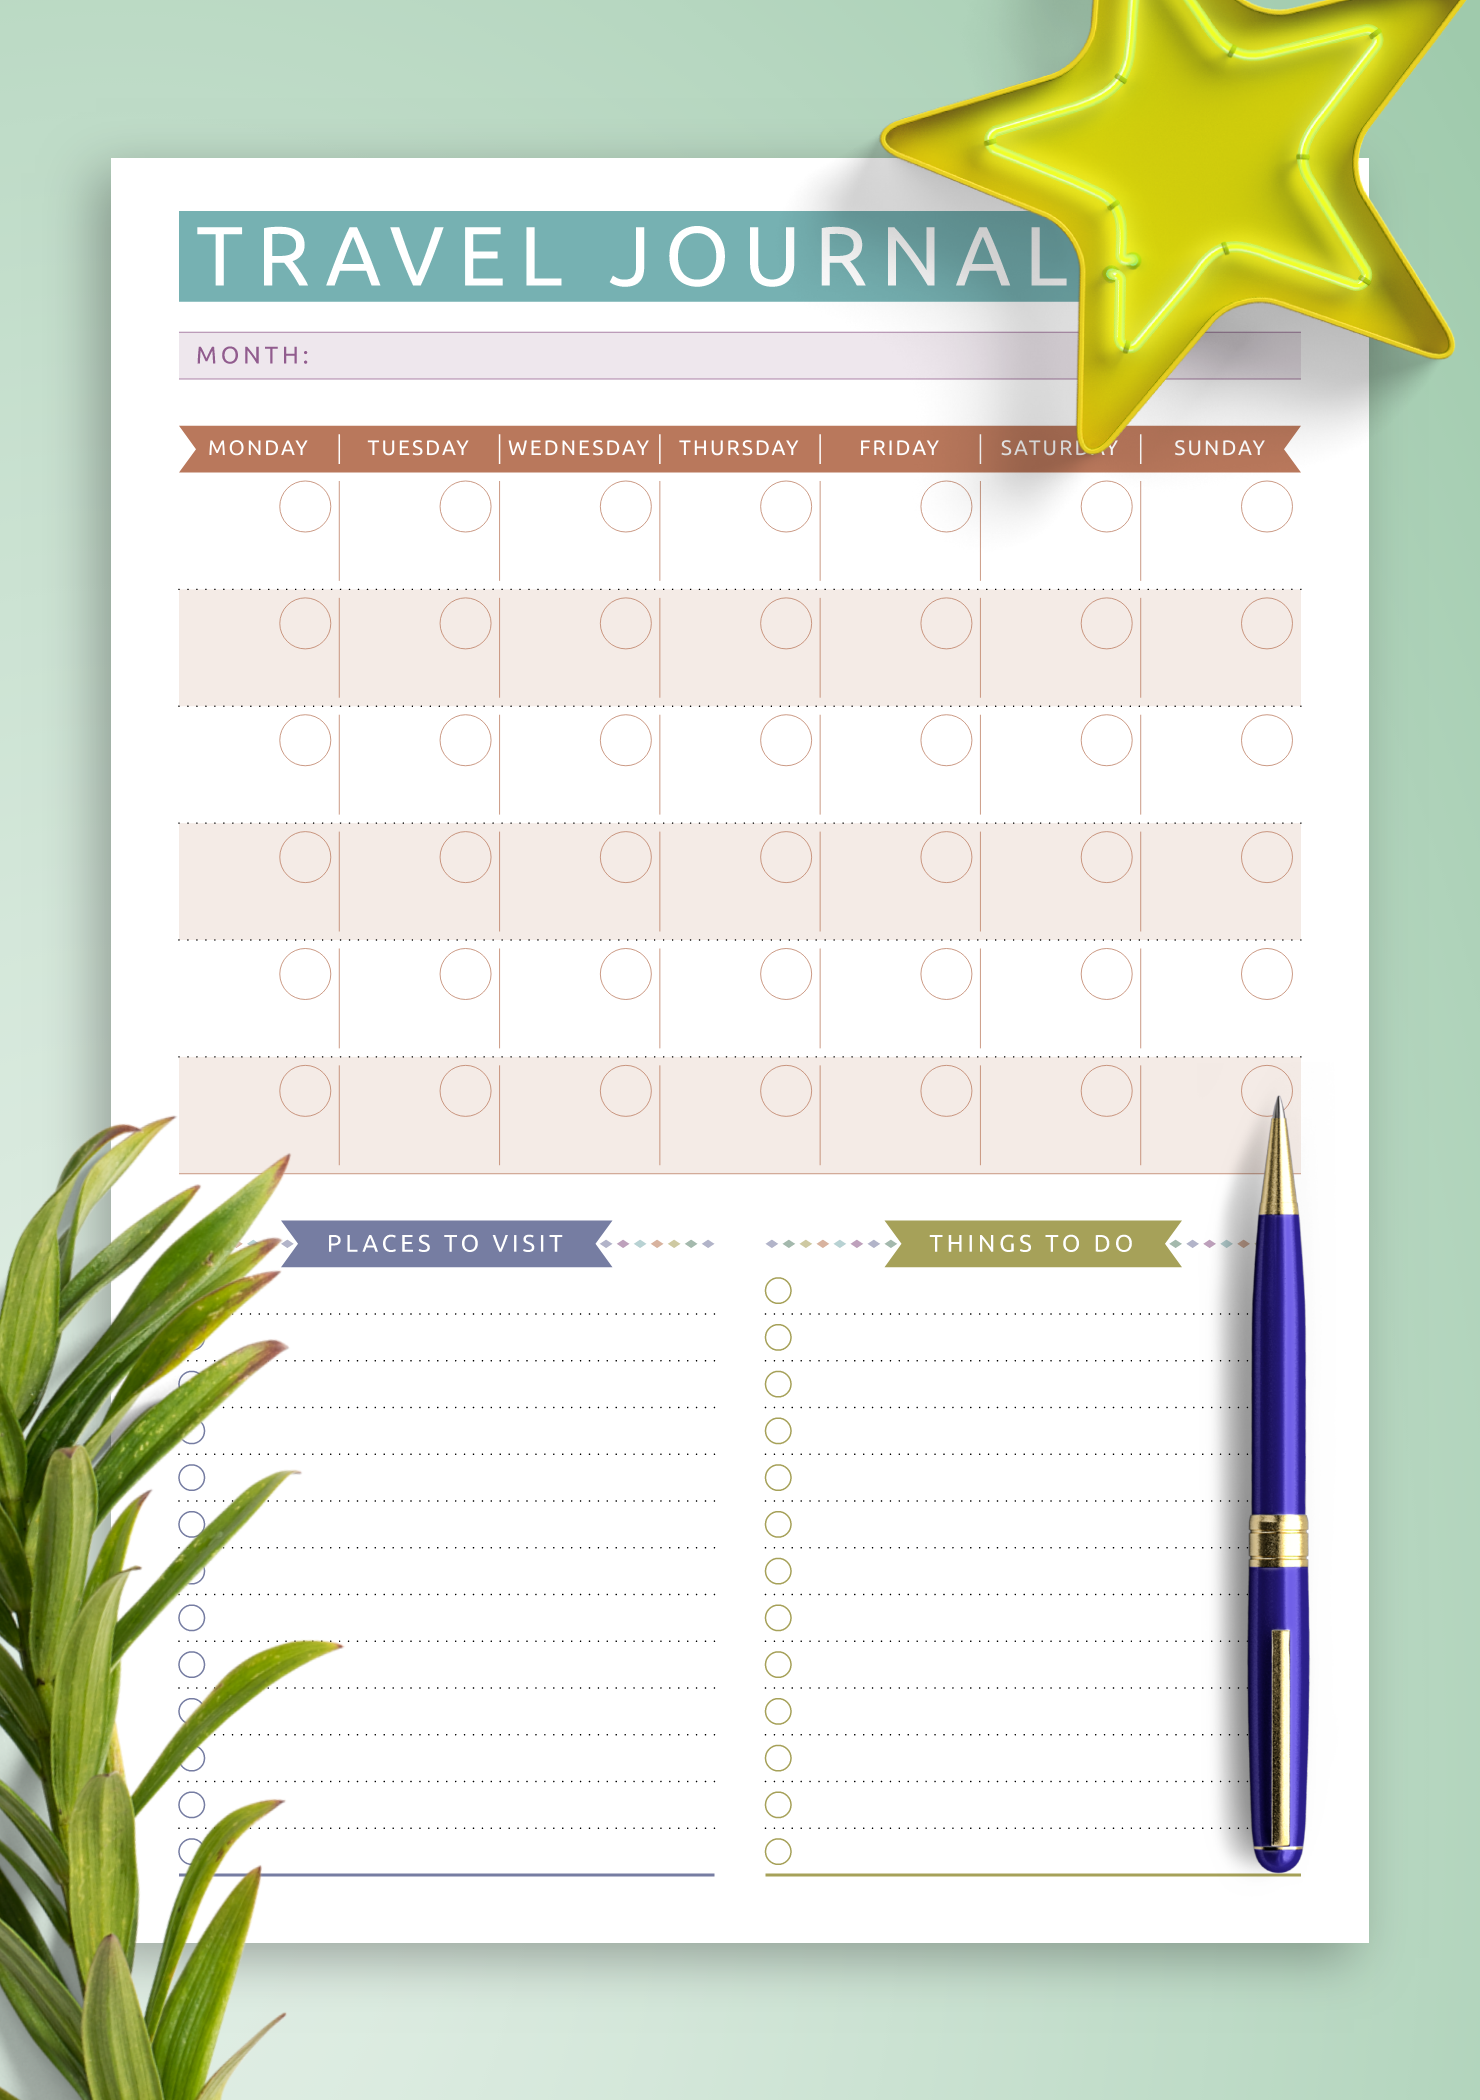 travel journal weekly template